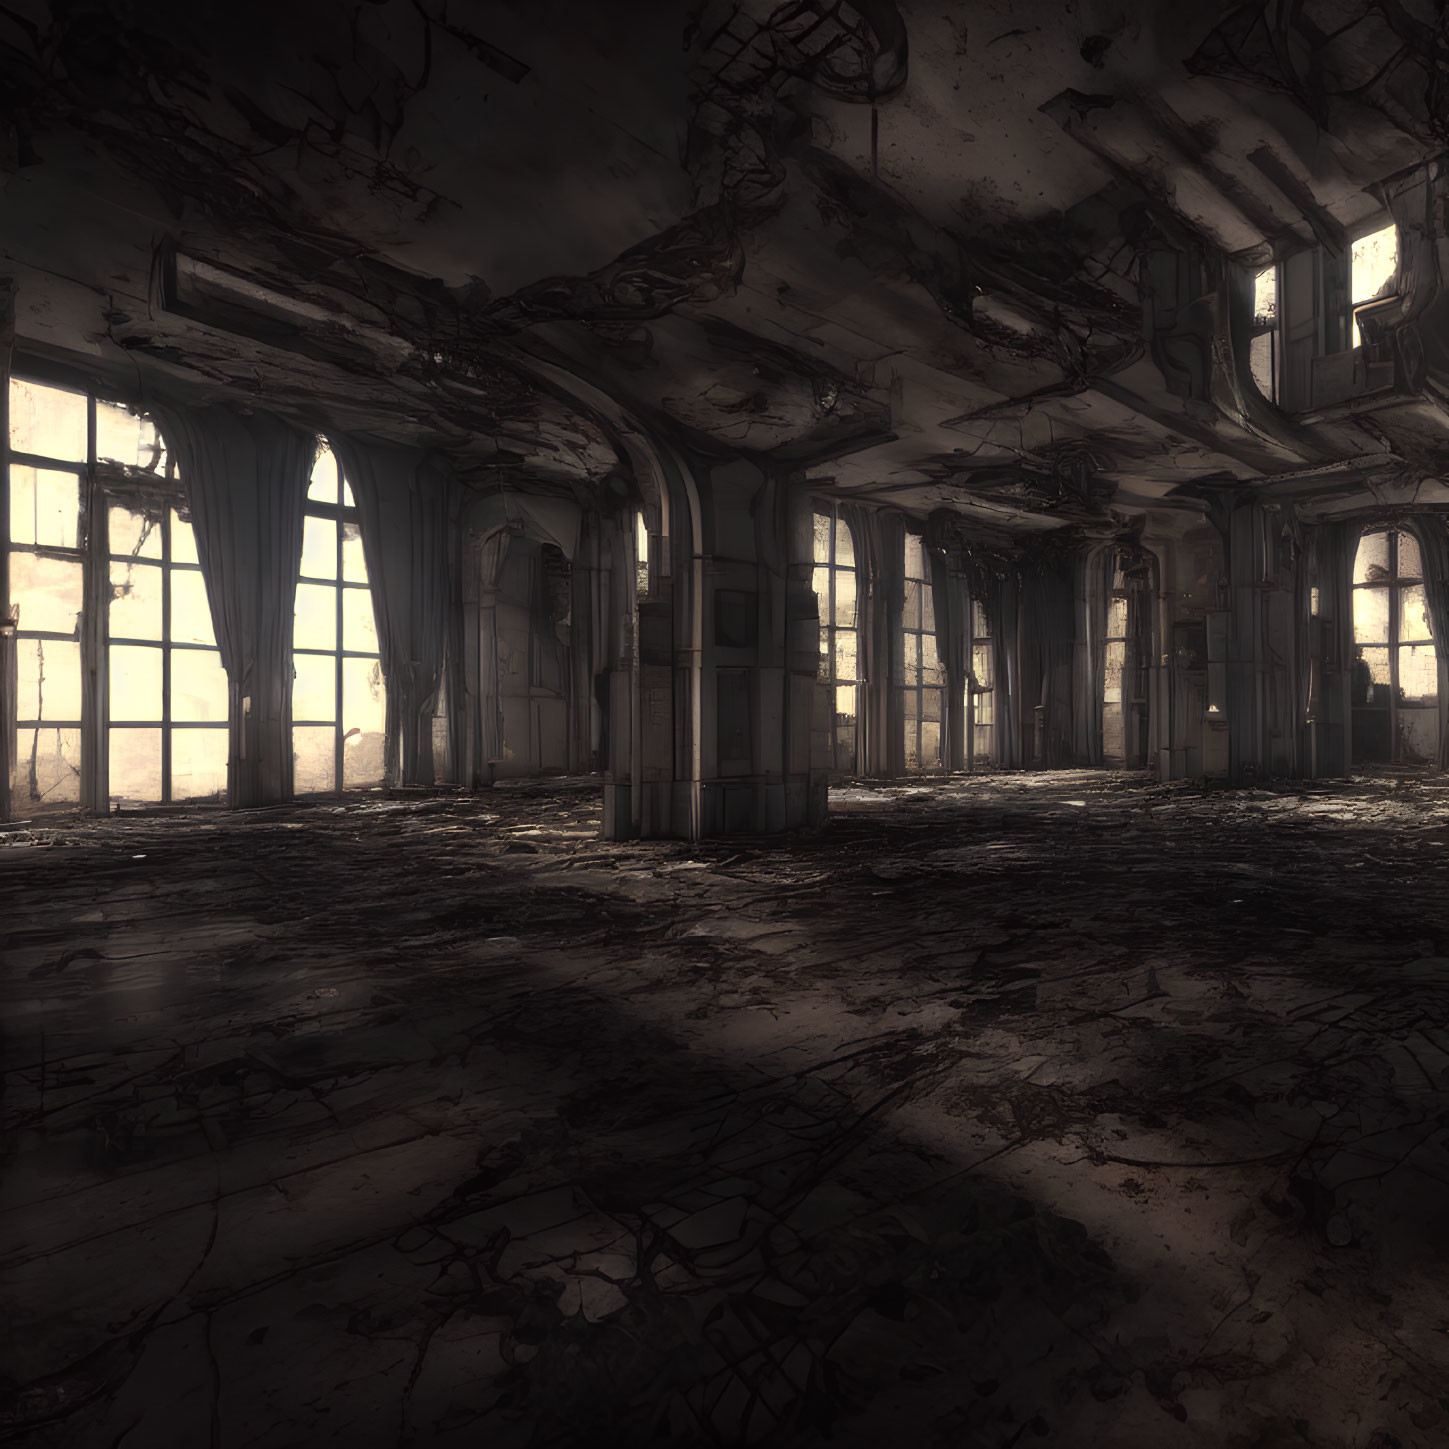 Abandoned hall with arched windows and damaged floors